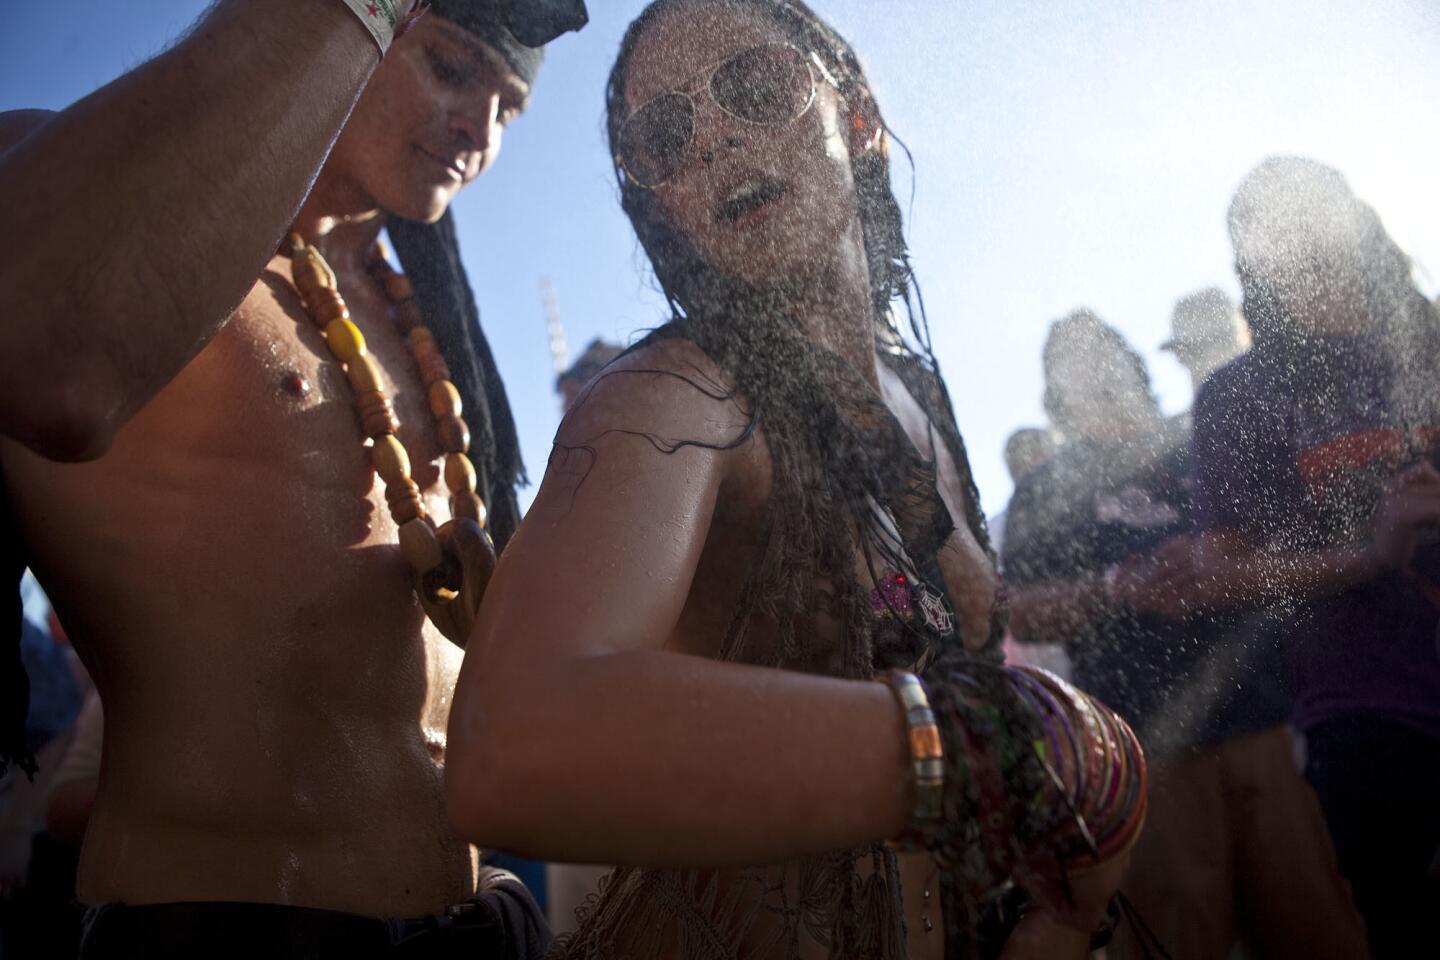 Jessica Mitchell dances to the beat of David Starfire in the Do Lab on the third day of the Coachella Music Festival, 2012.